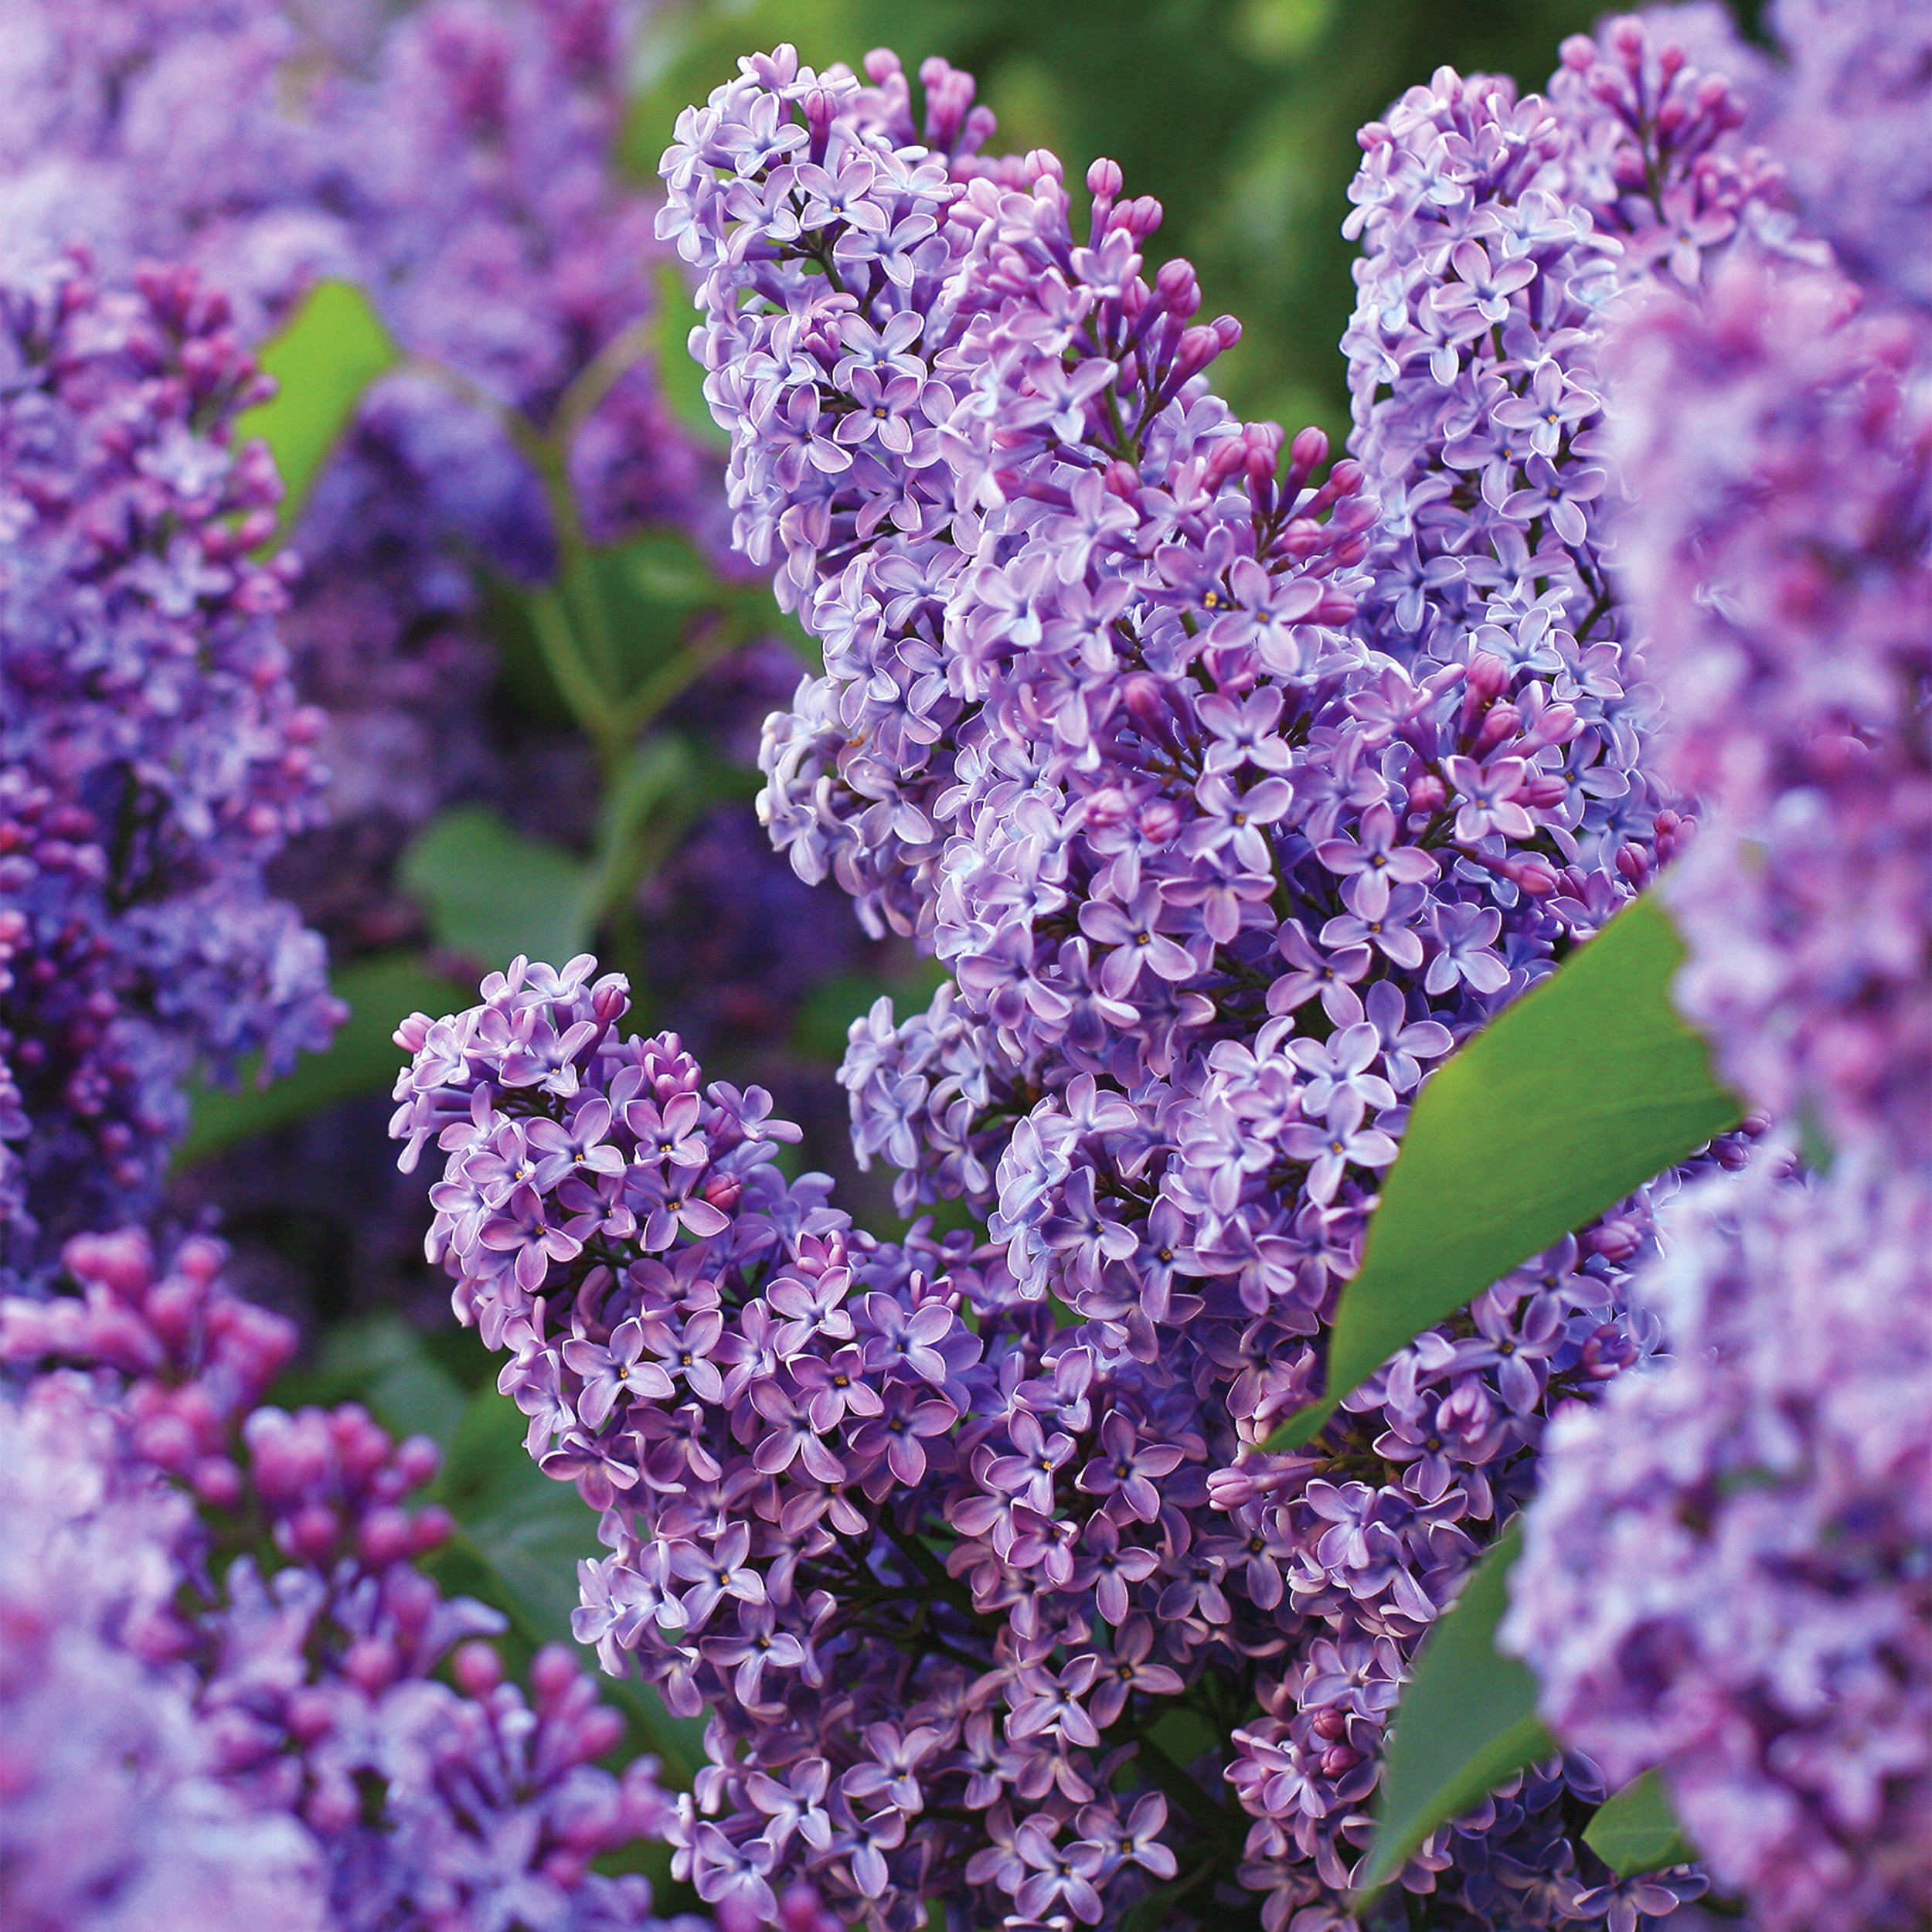 Garden State Bulb Common Purple Lilac Shrub, Live Bare Root (Bag of 1) - image 1 of 8